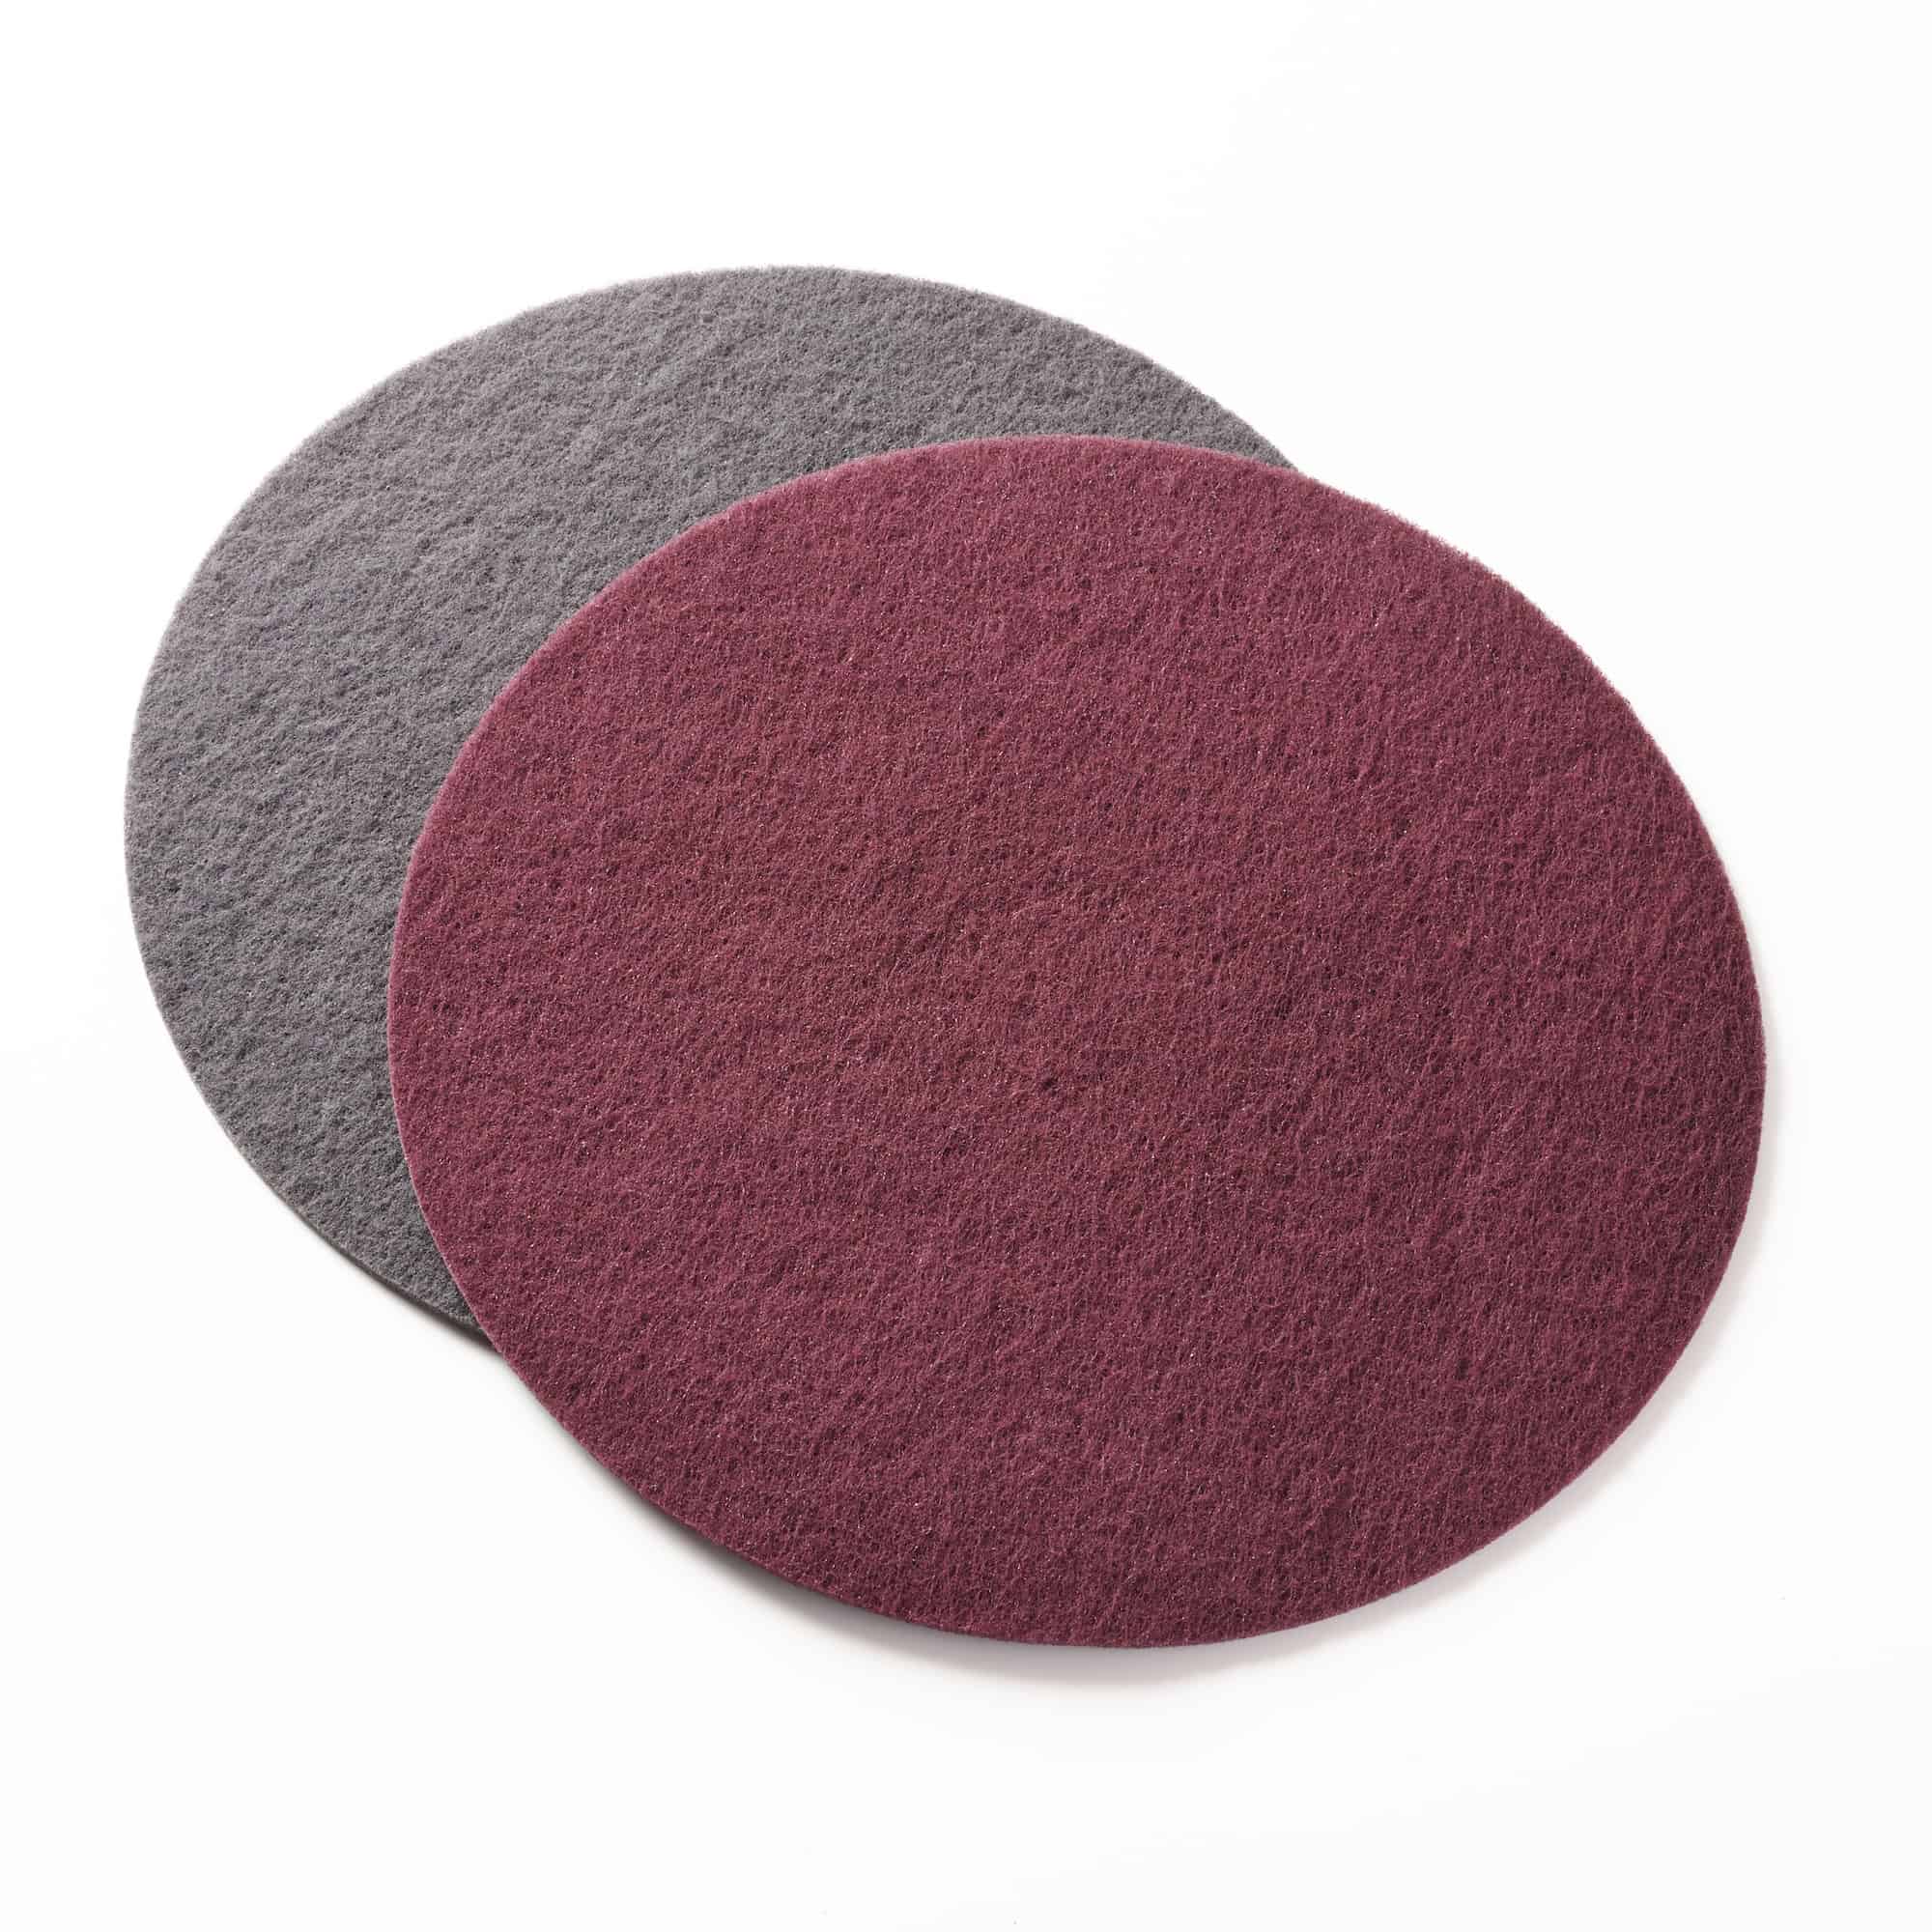 Photo of two scrubbing pads, one grey and one maroon laid over it